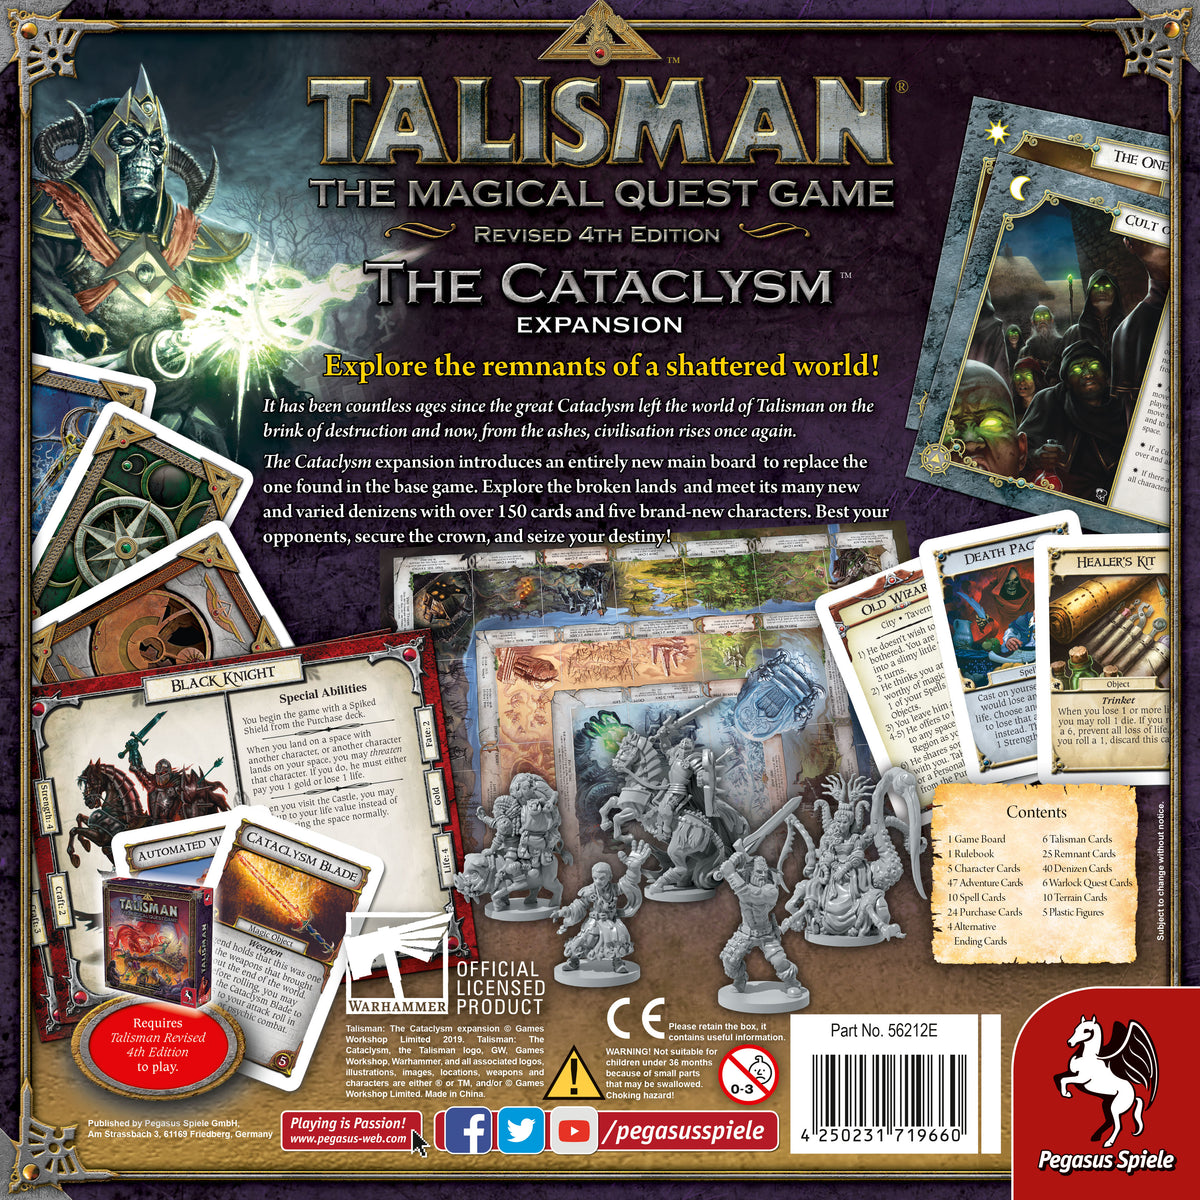 Talisman 4th Edition The Cataclysm